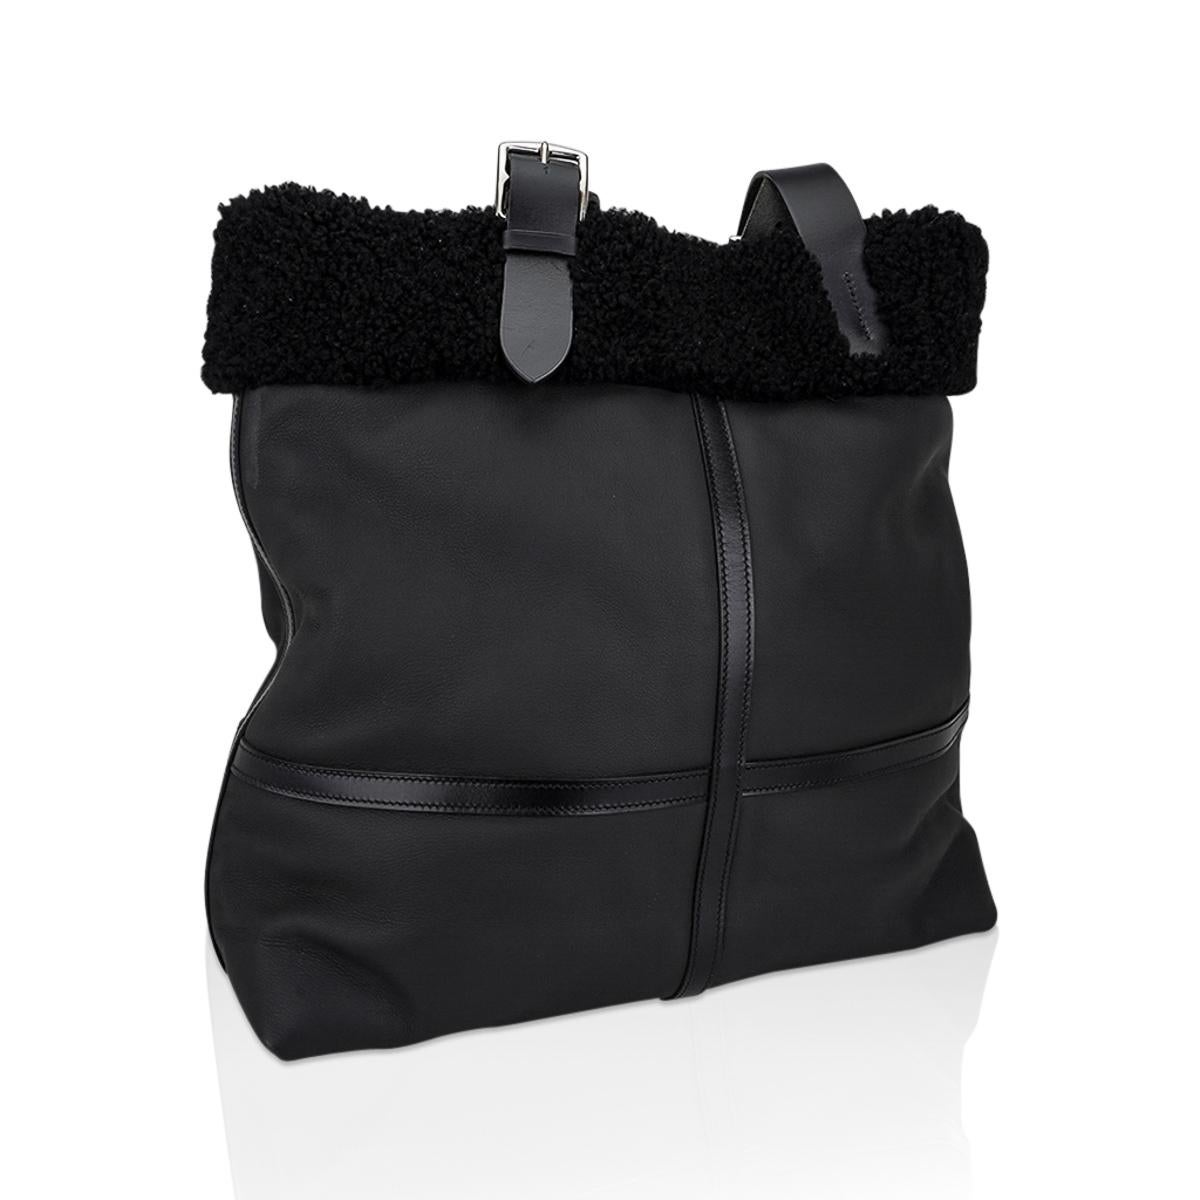 Mightychic offers an Hermes Aviateur Etriviere Shopping Tote featured in Black.
Taurillon Cristobal and Vache Hunter leather.
Edged and lined in Aviateur shearling.
Double adjustable leather straps.
Versatile tote - can be carried by hand or over